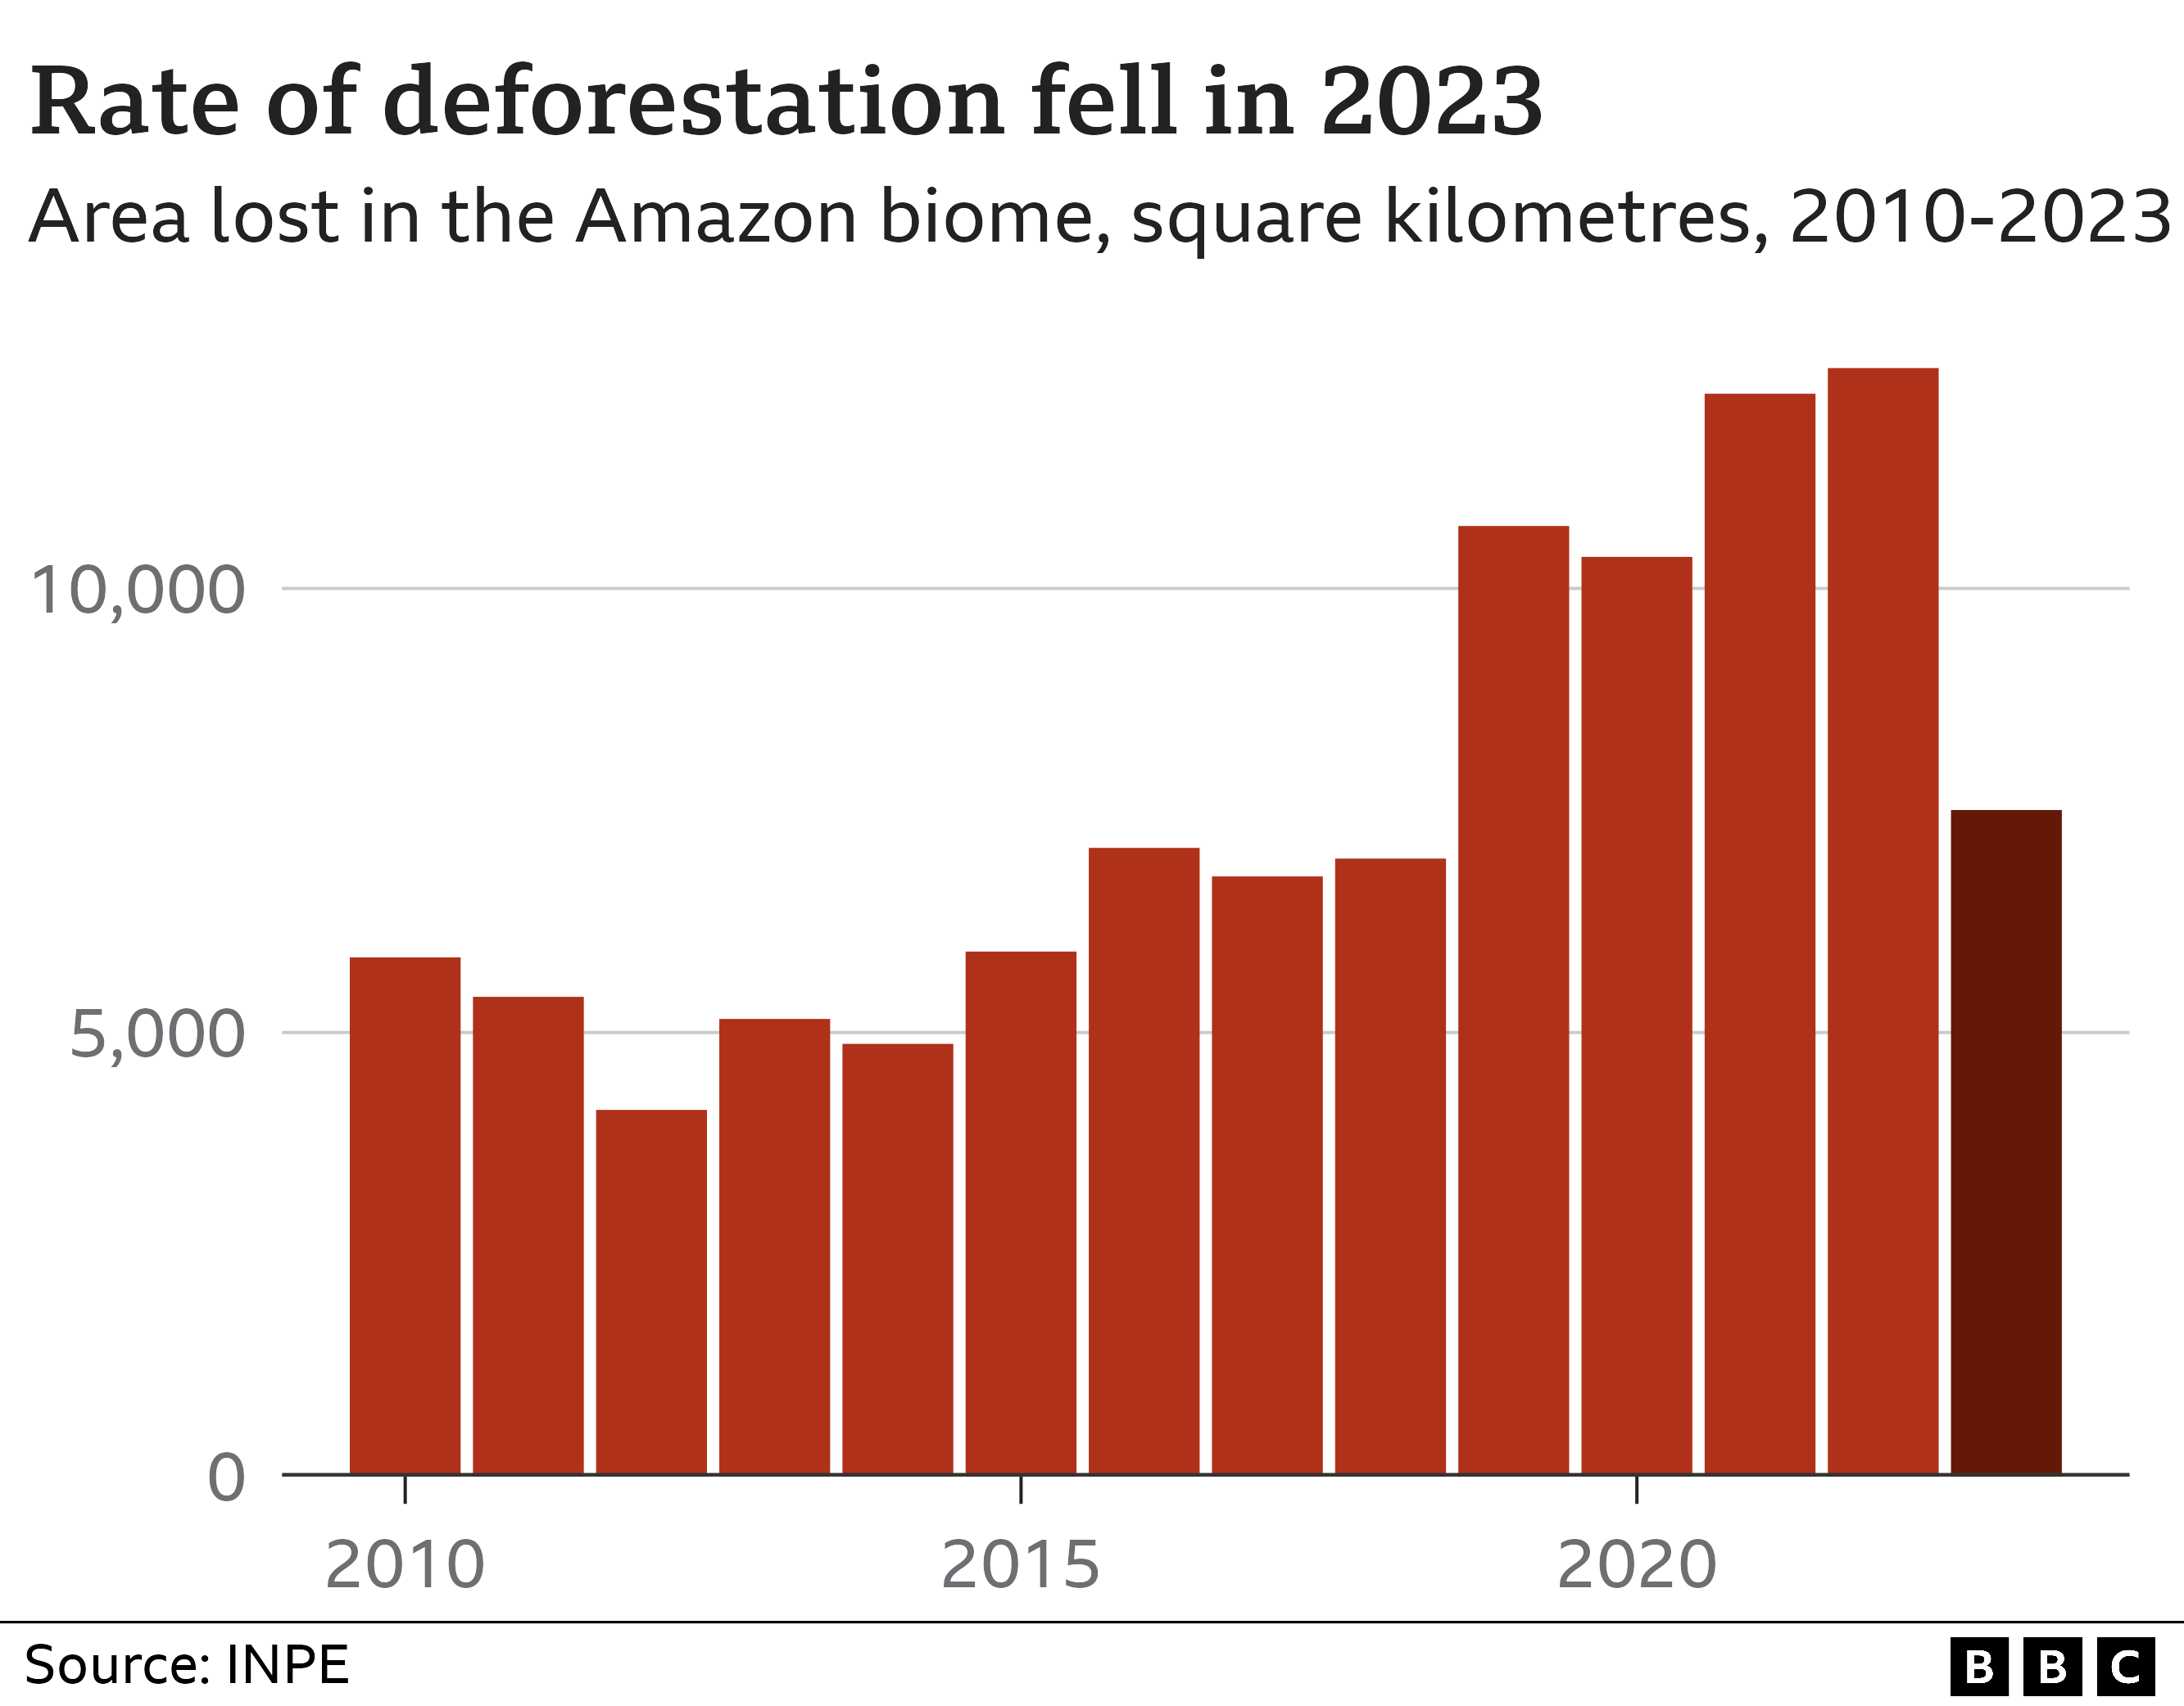 Chart showing deforestation in the Amazon biome by year 2010-2023. The rate of forest loss fell in 2023.